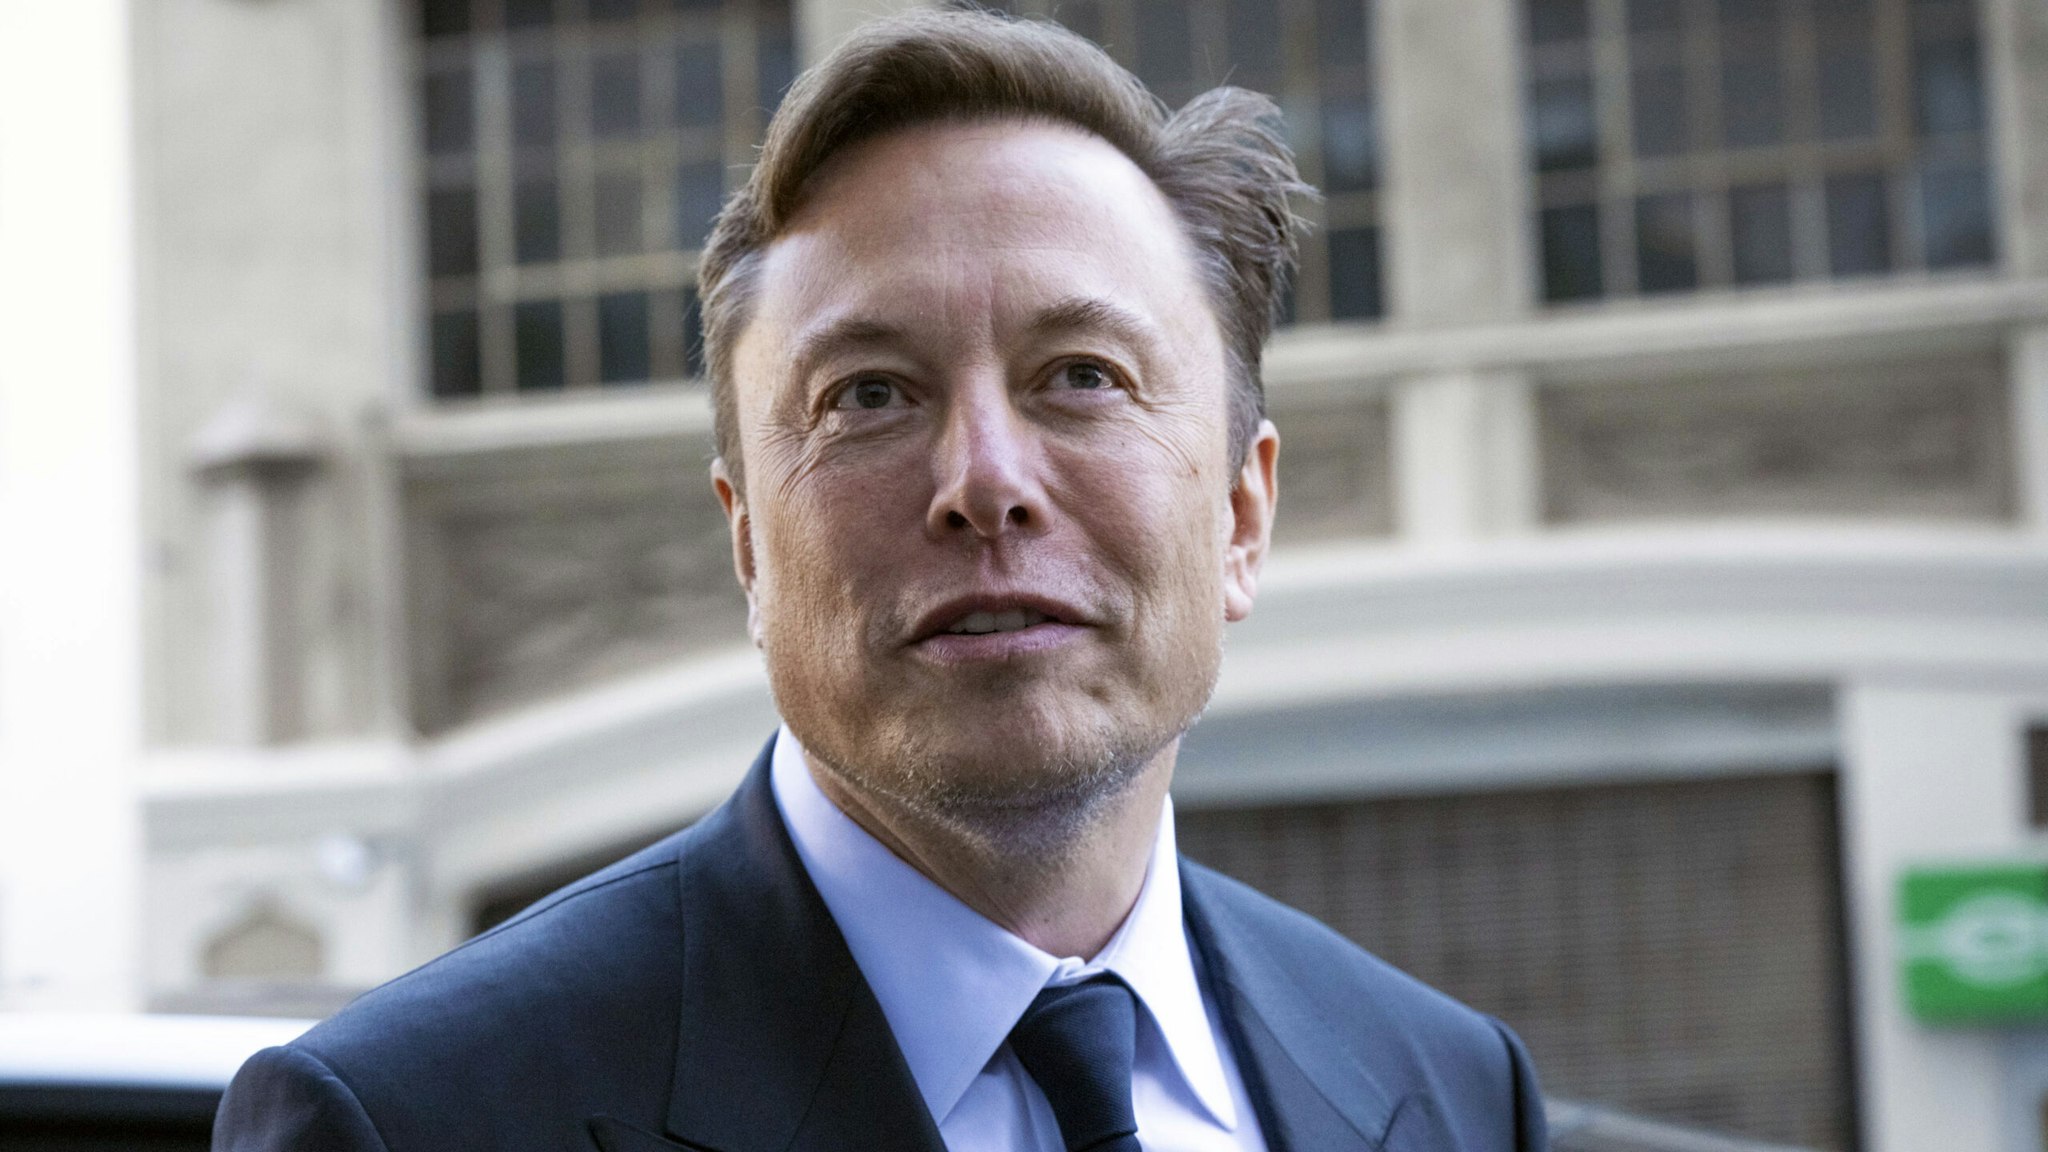 Elon Musk, chief executive officer of Tesla Inc., departs court in San Francisco, California, US, on Tuesday, Jan. 24, 2023. Investors suing Tesla and Musk argue that his August 2018 tweets about taking Tesla private with funding secured were indisputably false and cost them billions of dollars by spurring wild swings in Tesla's stock price.